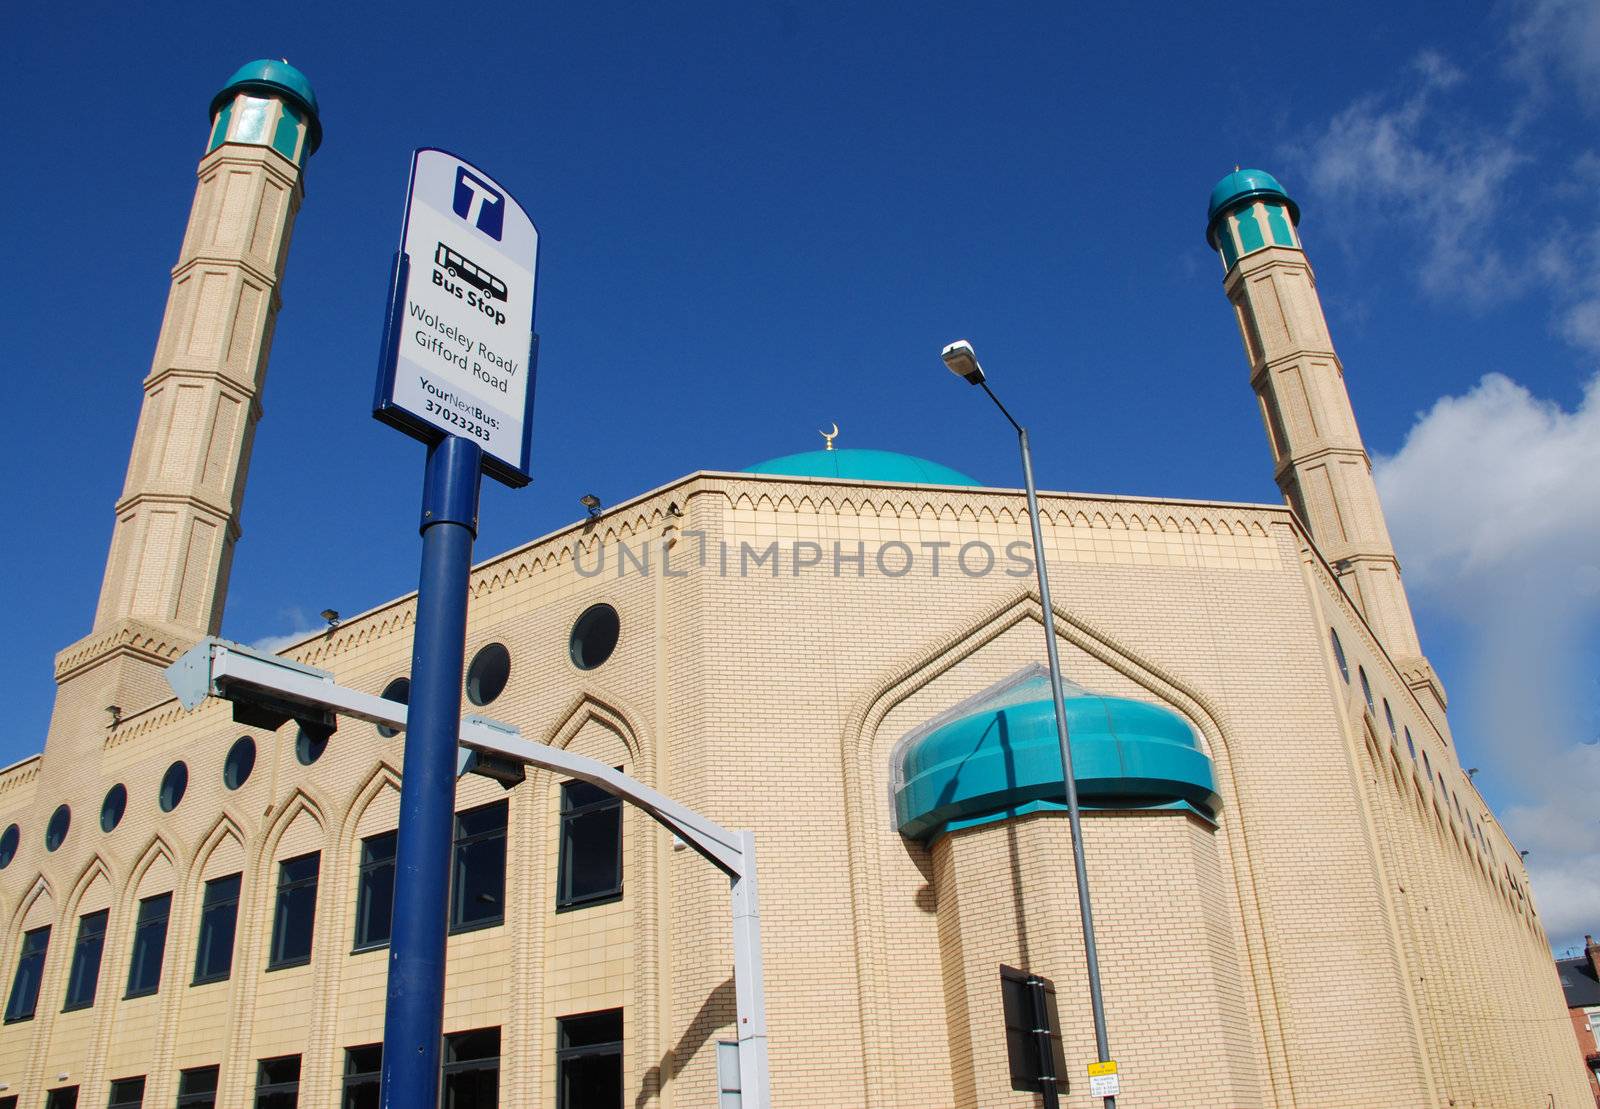 A photograph of a Mosque in Sheffield, a northern English city, next to a bus stop.